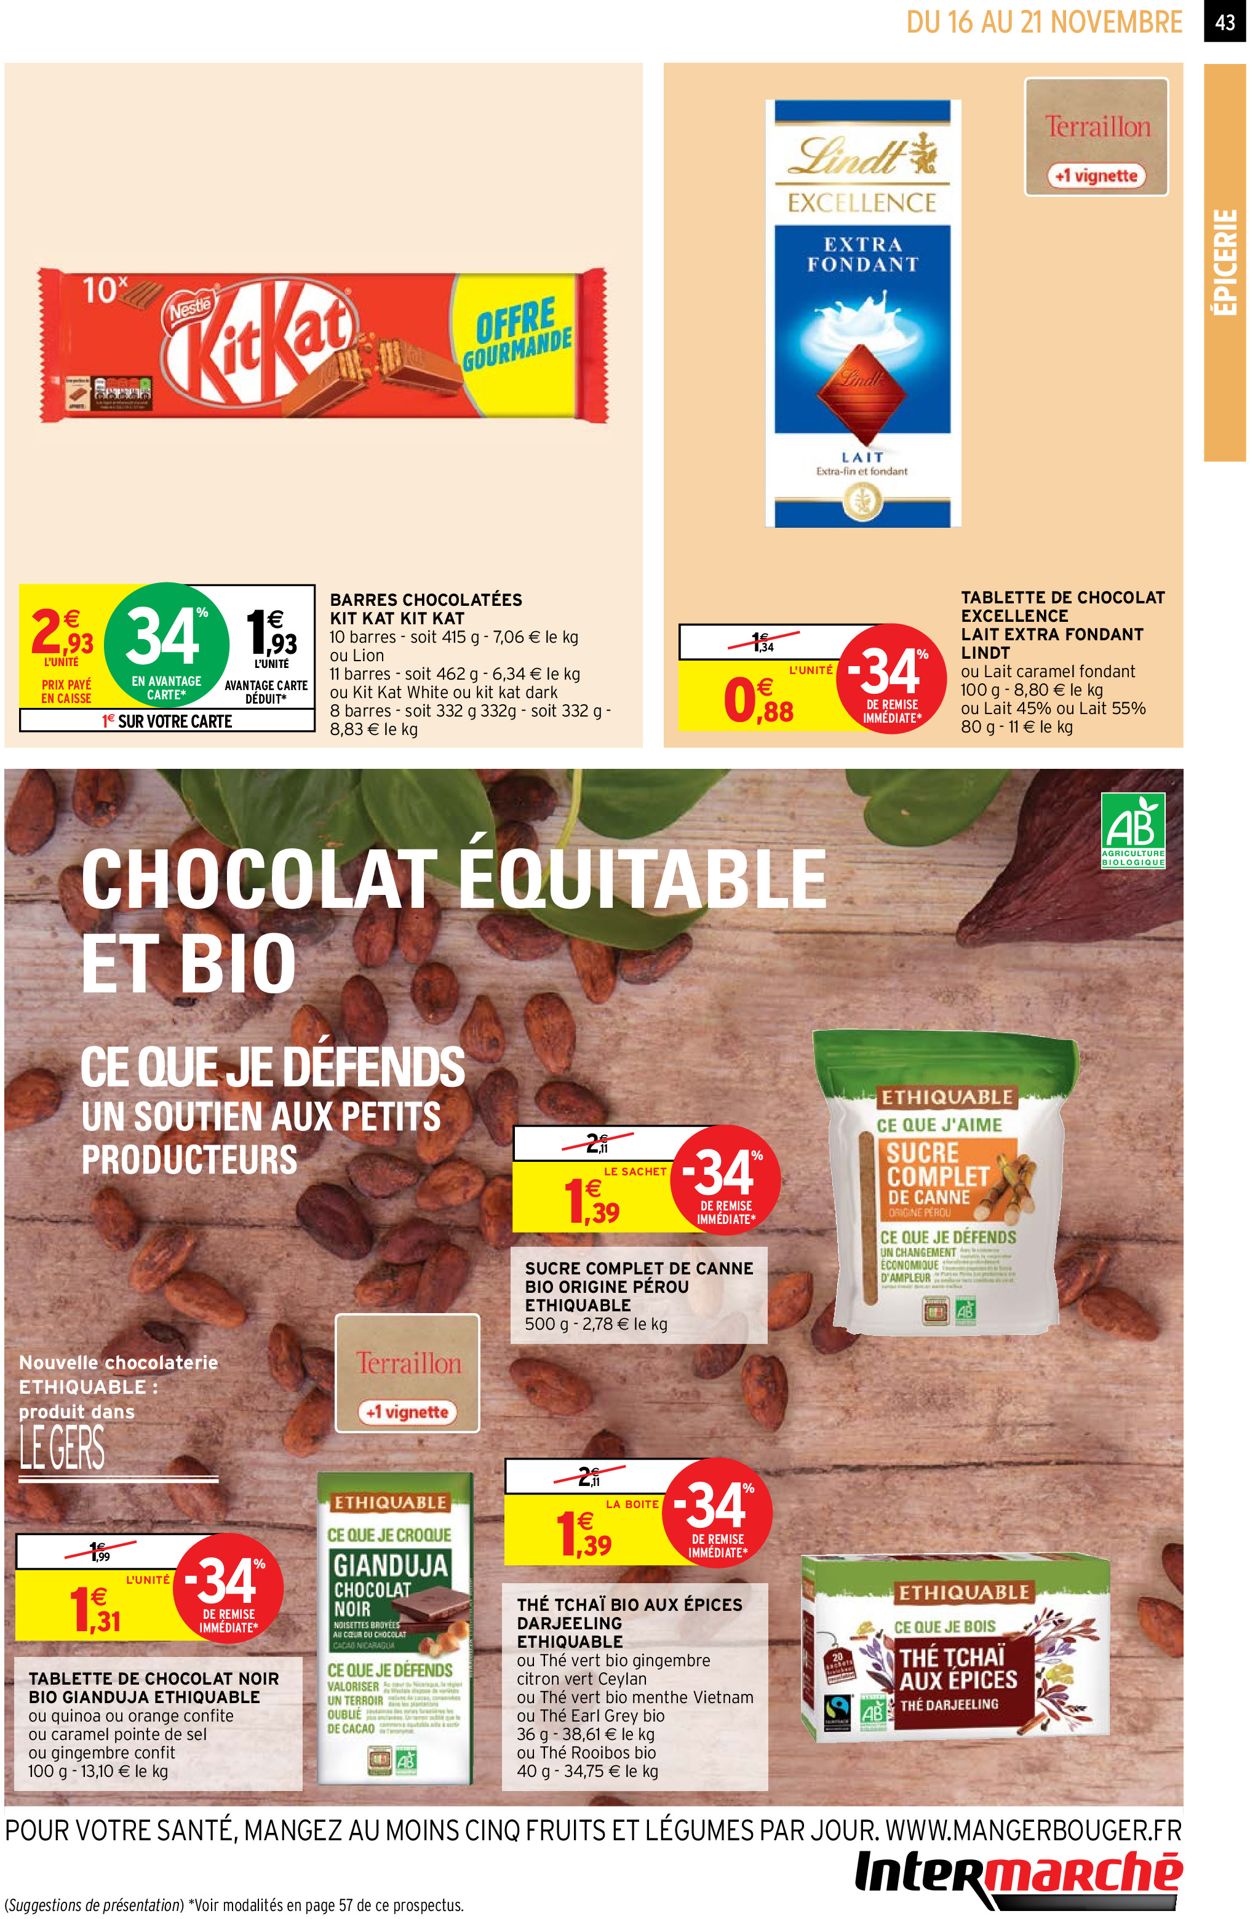 Intermarché  BLACK FRIDAY 2021 Catalogue - 16.11-21.11.2021 (Page 43)